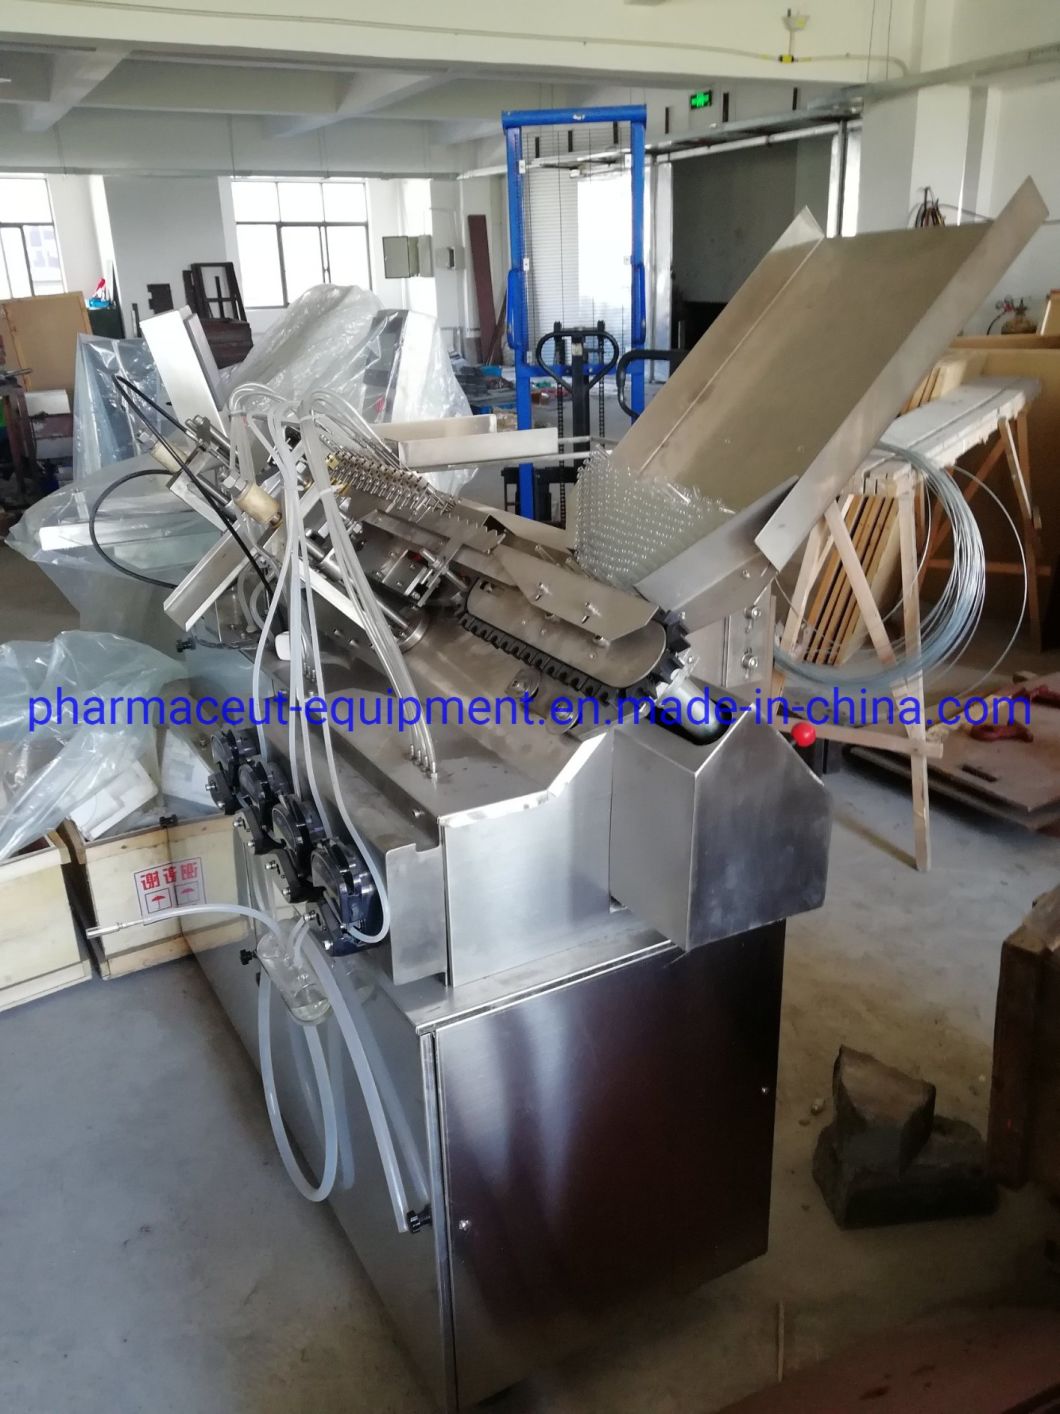 China Suppliers Glass Ampoule Medical Filling Sealing Machine